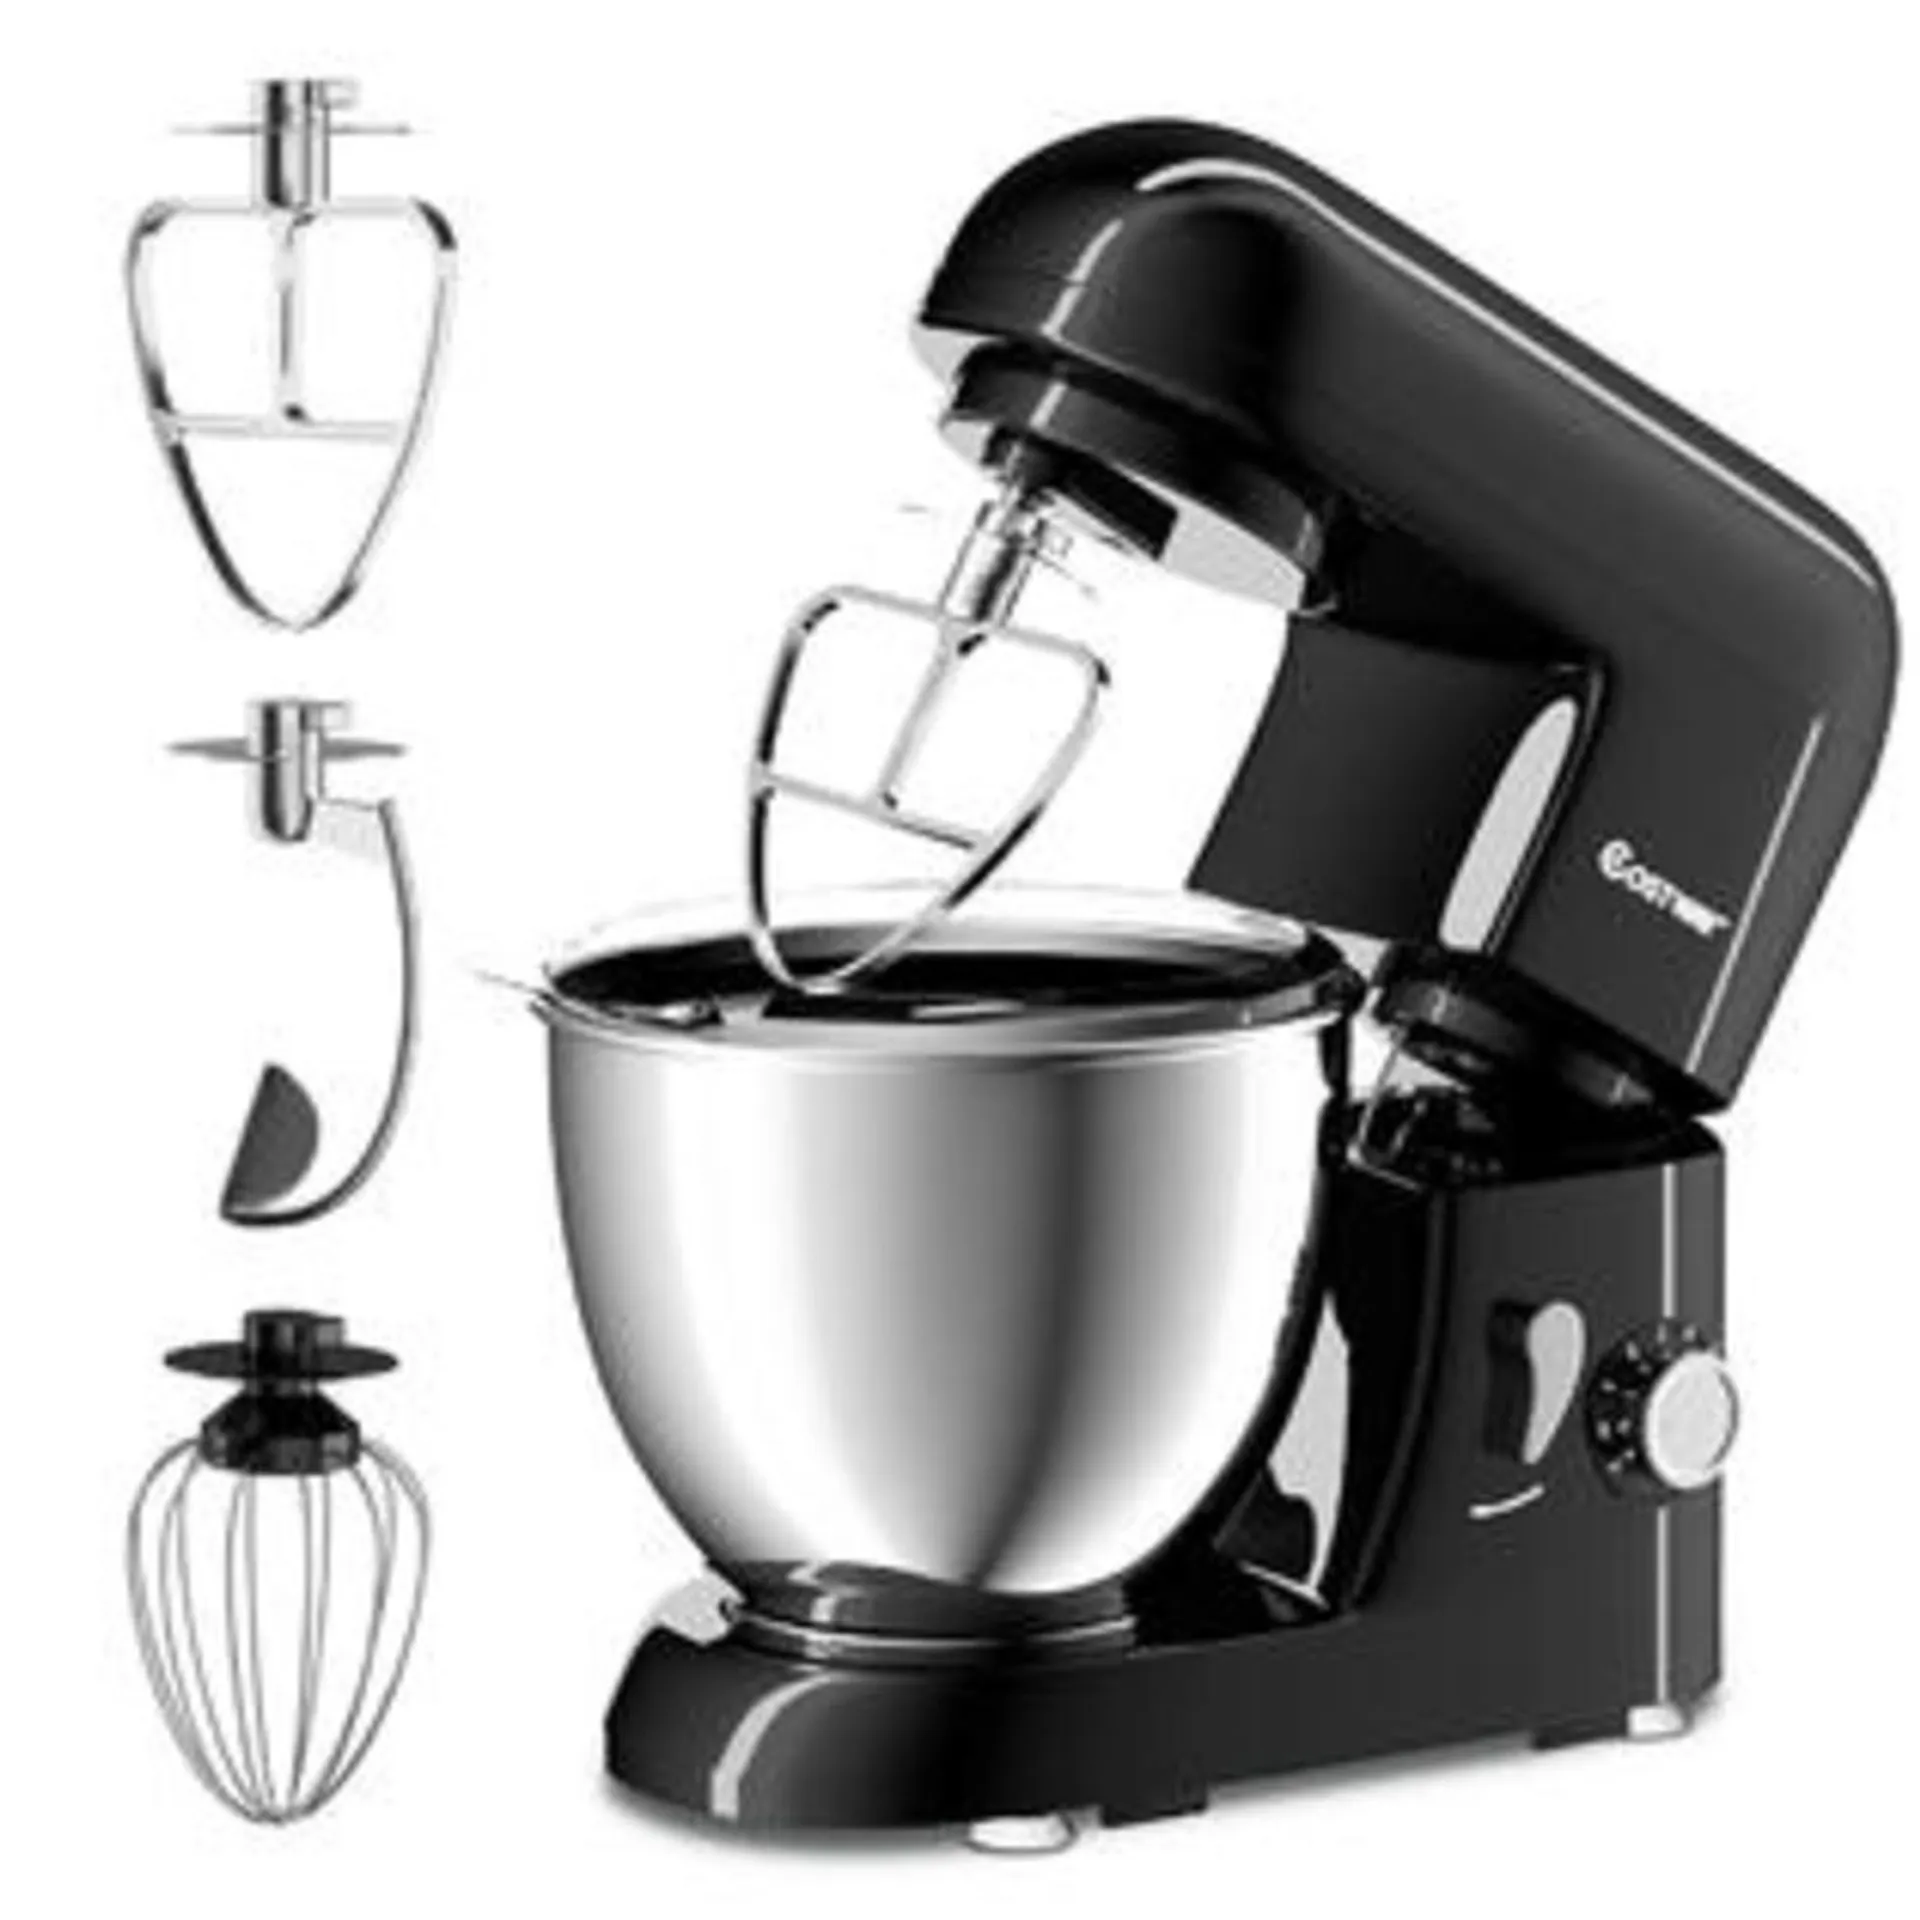 Costway HW56218BK Electric Food Stand Mixer 6 Speed 4.3Qt 550W Tilt-Head Stainless Steel Bowl New